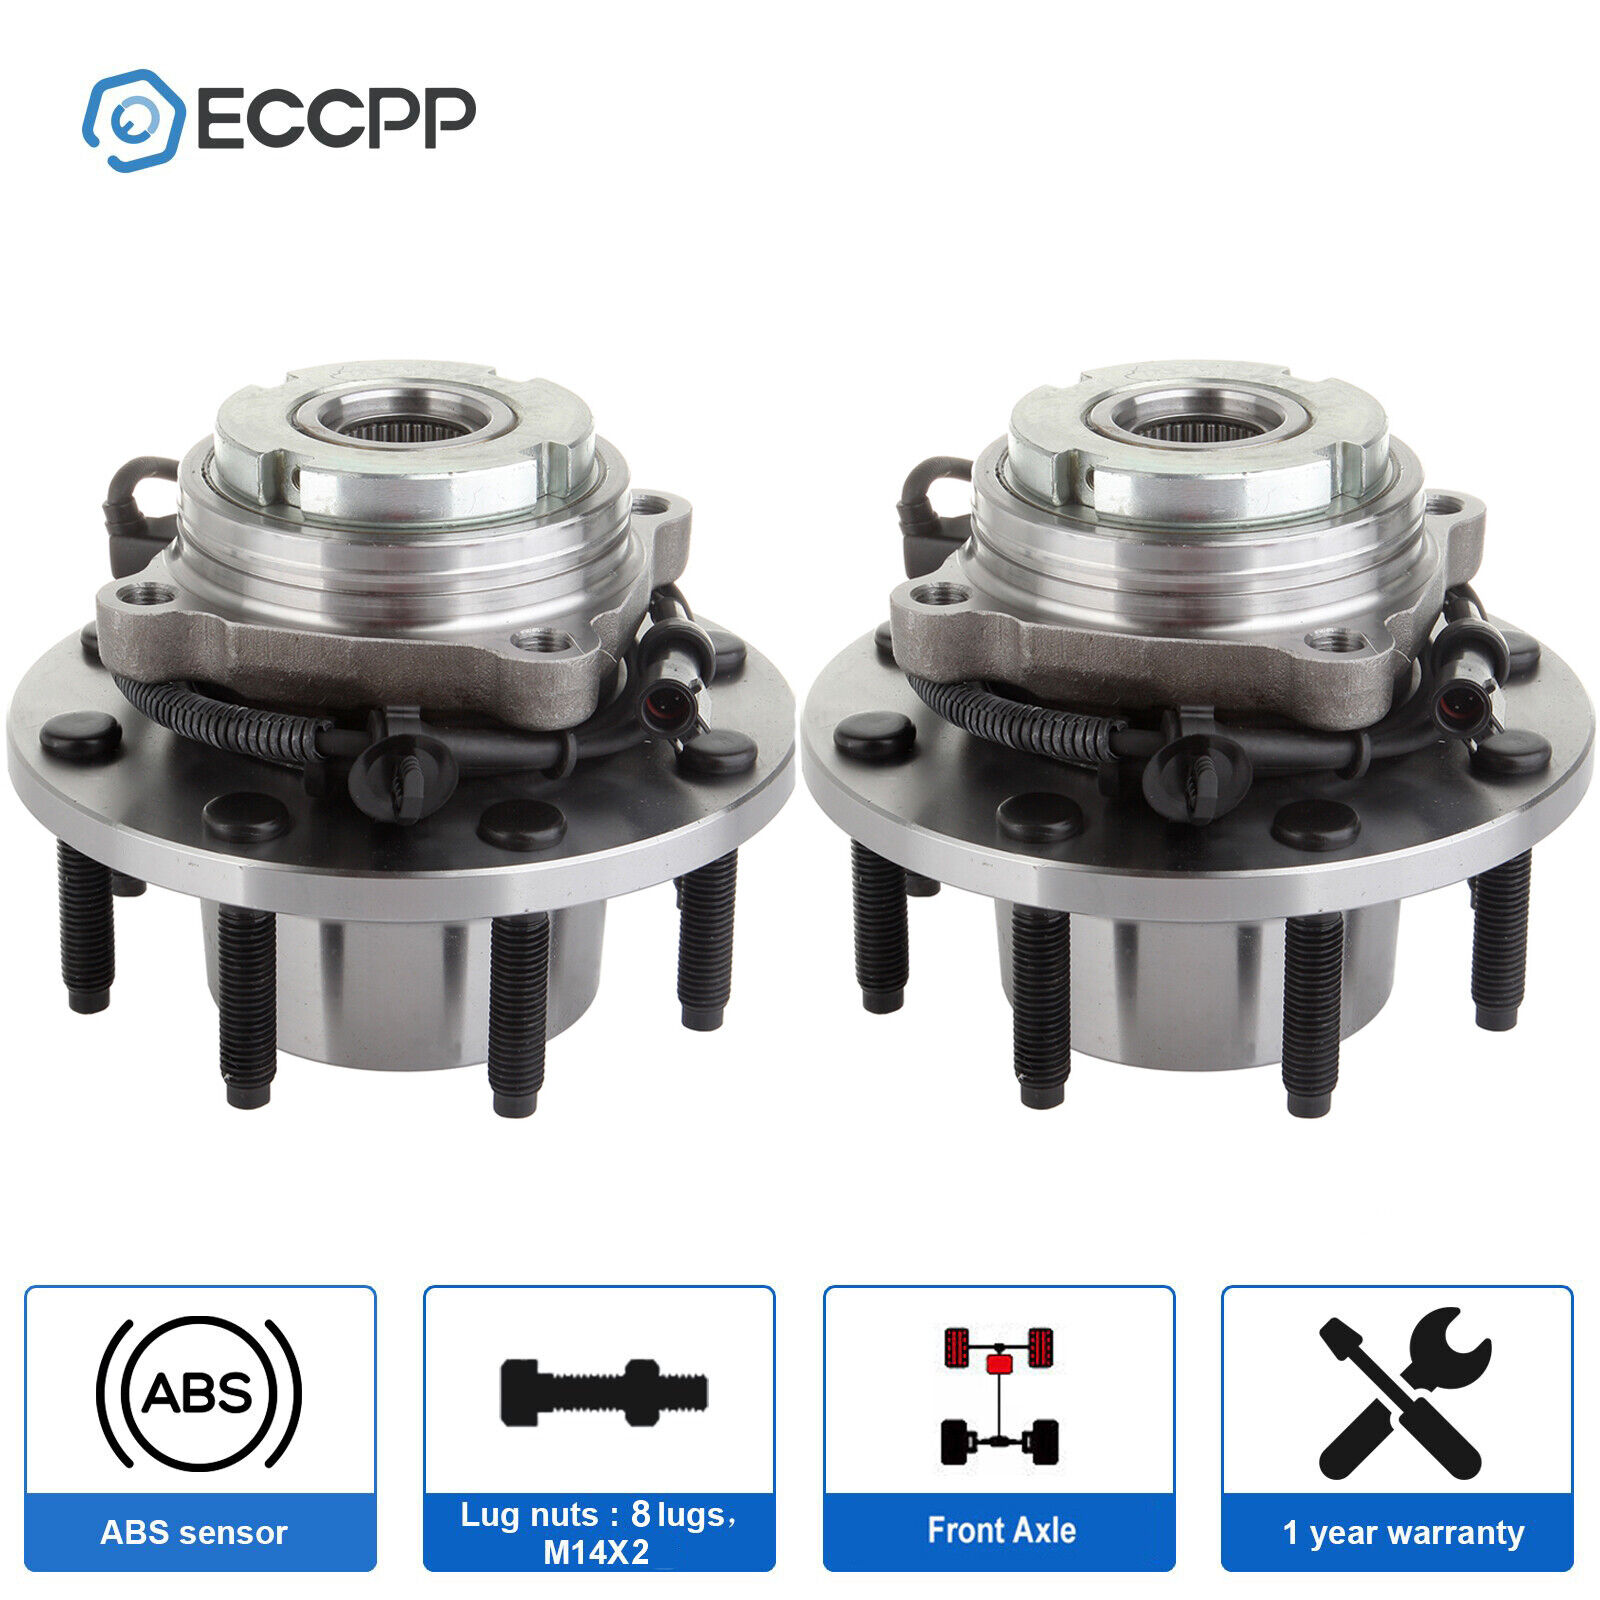 ECCPP 2Pcs Wheel Hub Bearing Front For 1999-2004 Ford F250 F350 SD Excursion 4WD